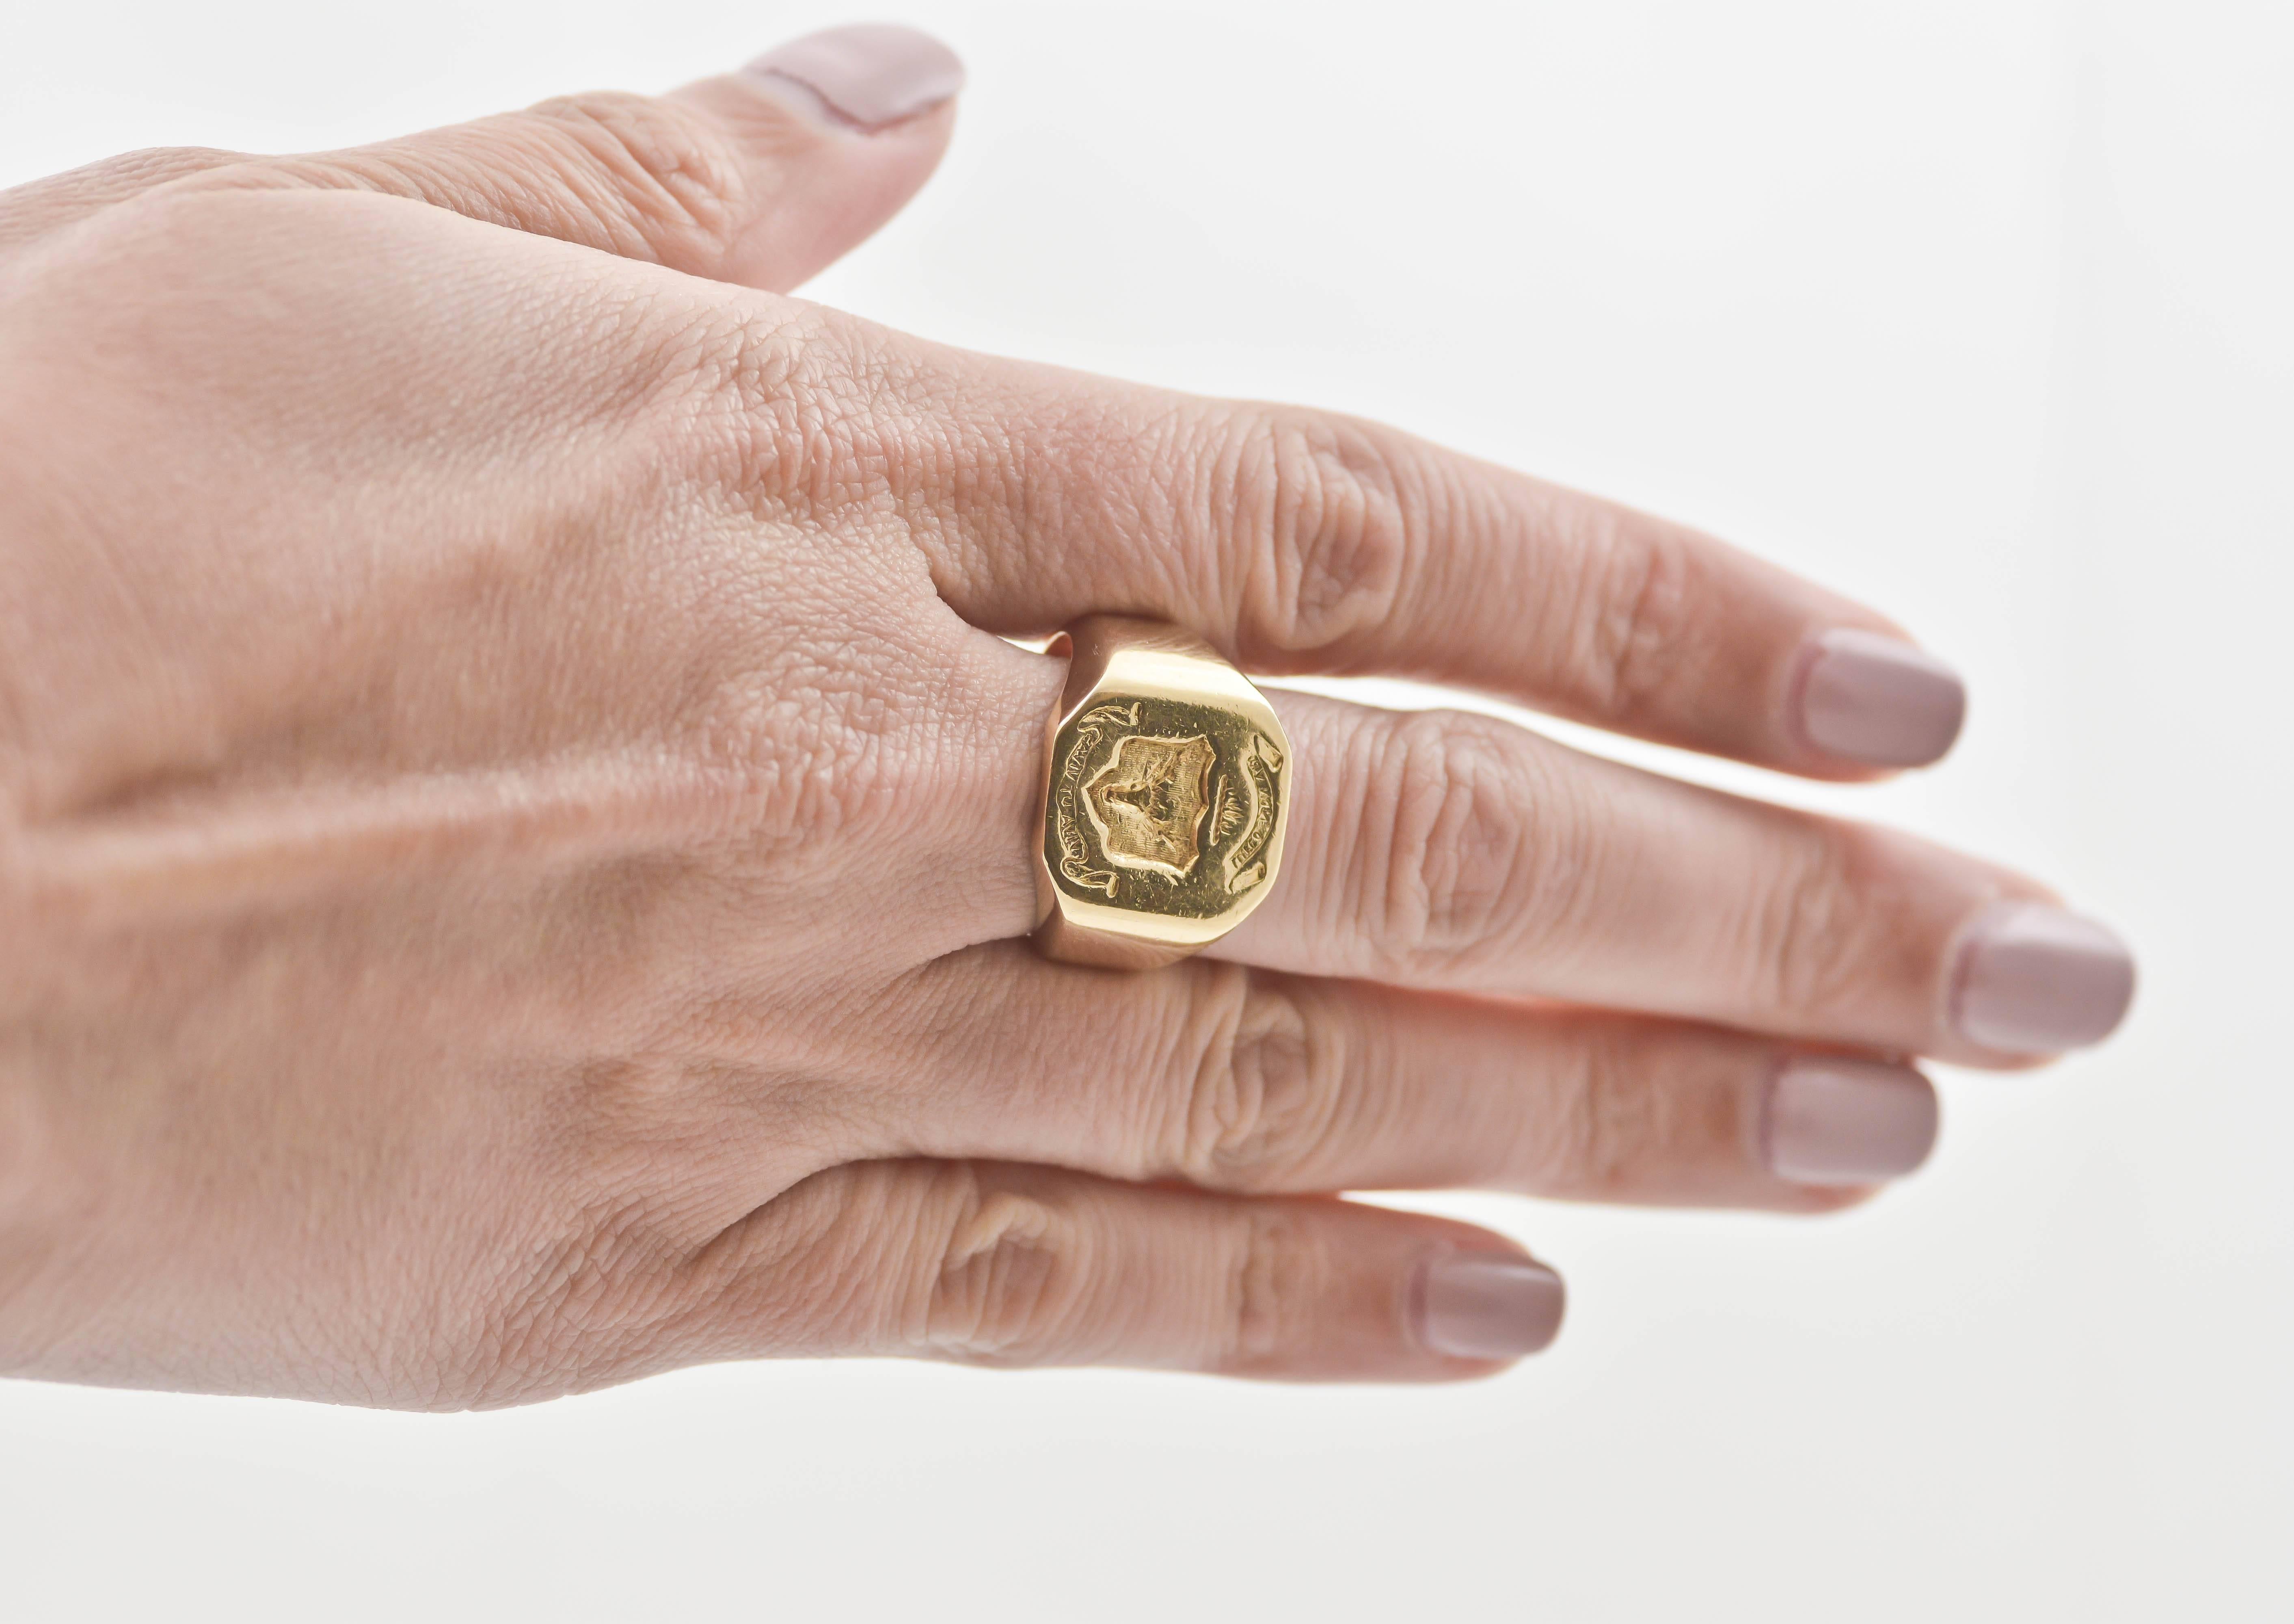 This classic, signet style crest ring is hand engraved with a shield bearing the image of a stag’s bust surrounded by ribbons of letters. The crest shown is for Clan Mackenzie, with the top line reading 